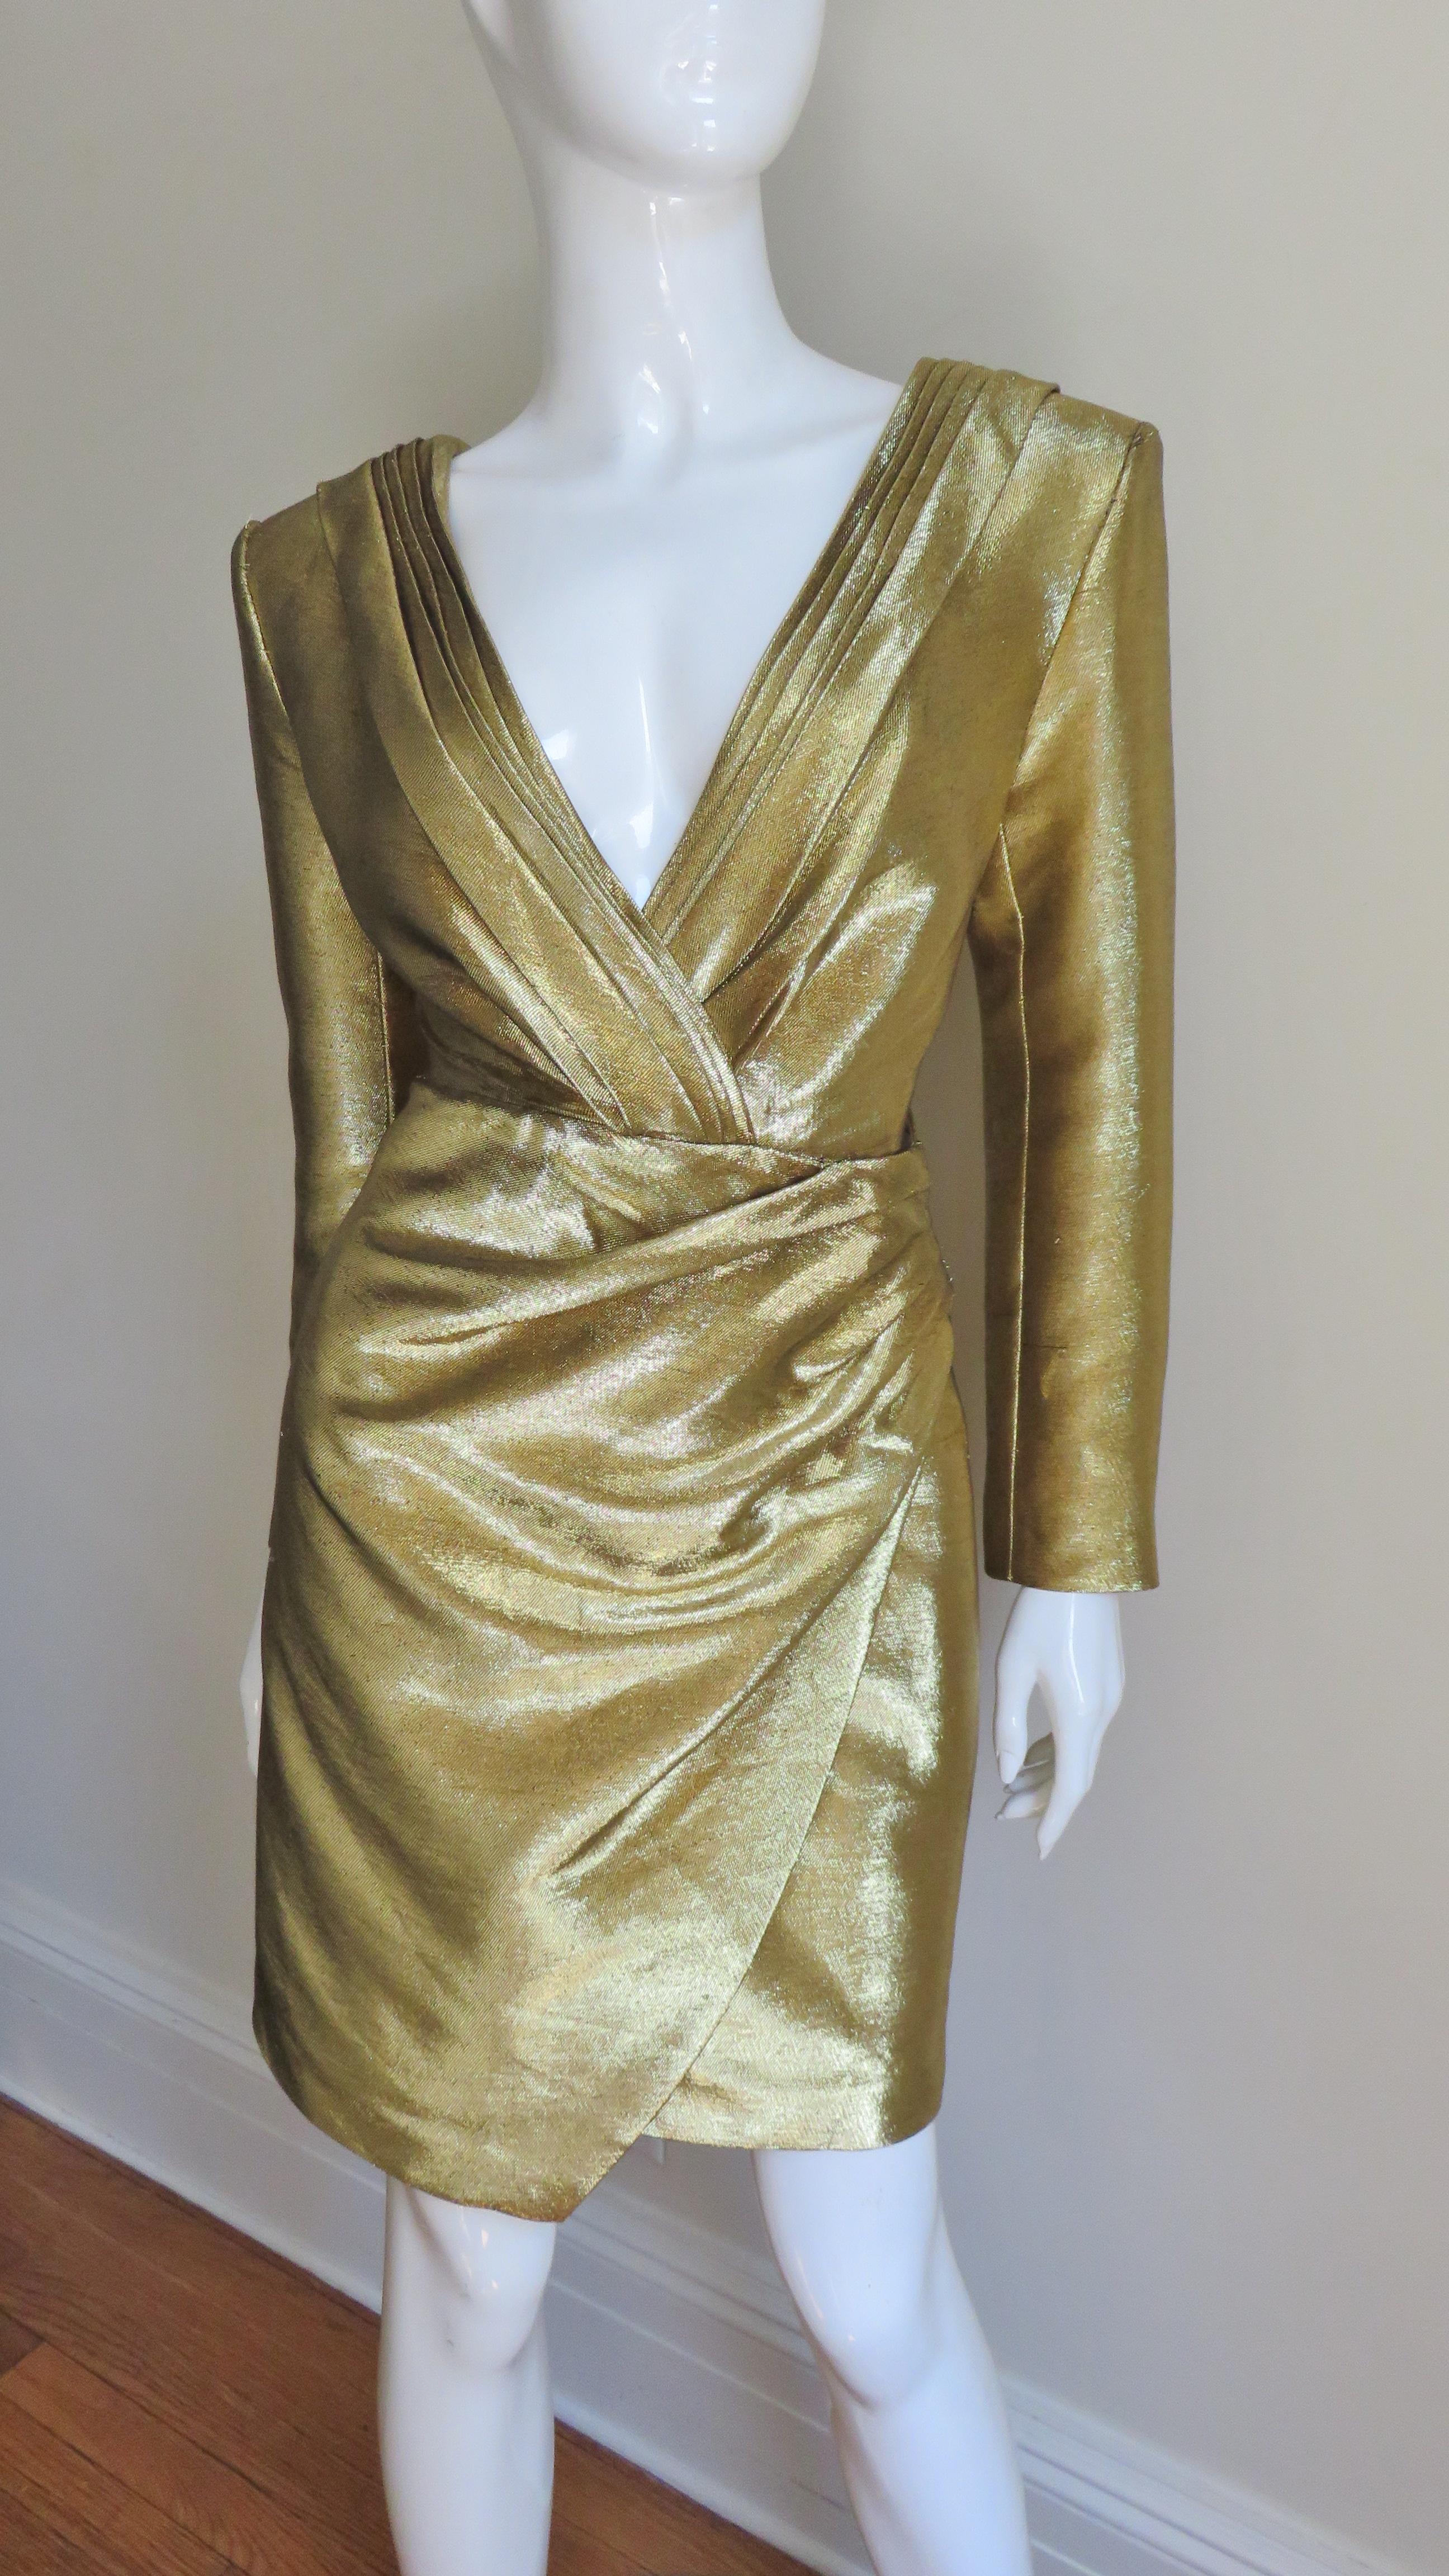 An incredible gold lame plunge front dress from Saint Laurent. It has a plunging front and back neckline framed in folds of the gold fabric crossing at the center front and back.  The skirt is softly draping and folds over one side at an angle. 